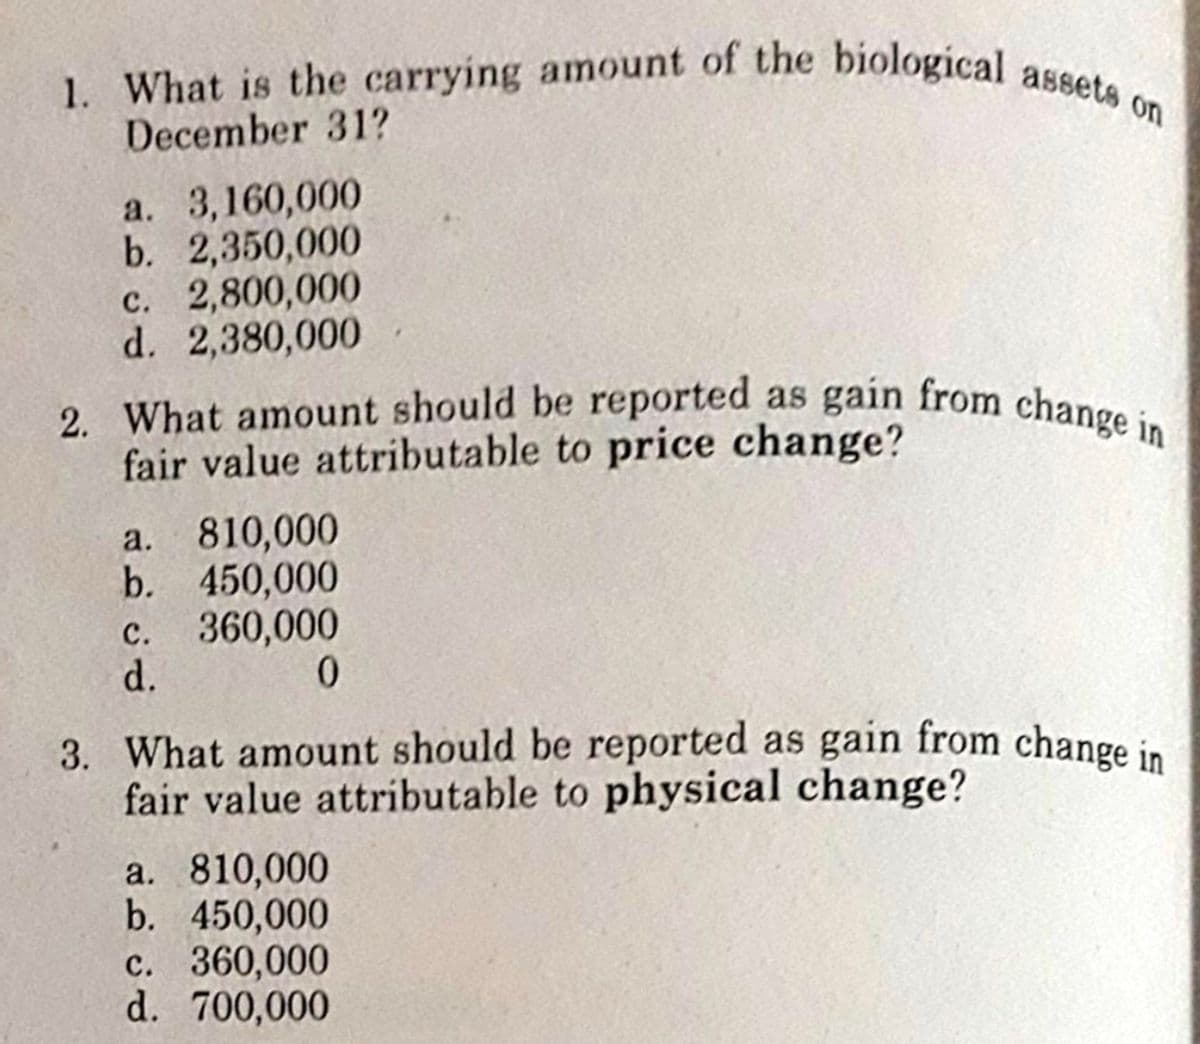 2. What amount should be reported as gain from change i
1. What is the carrying amount of the biological assets on
December 31?
а. 3,160,000
b. 2,350,000
c. 2,800,000
d. 2,380,000
fair value attributable to price change?
a. 810,000
b. 450,000
c. 360,000
d.
0.
3. What amount should be reported as gain from change in
fair value attributable to physical change?
а. 810,000
b. 450,000
c. 360,000
d. 700,000
